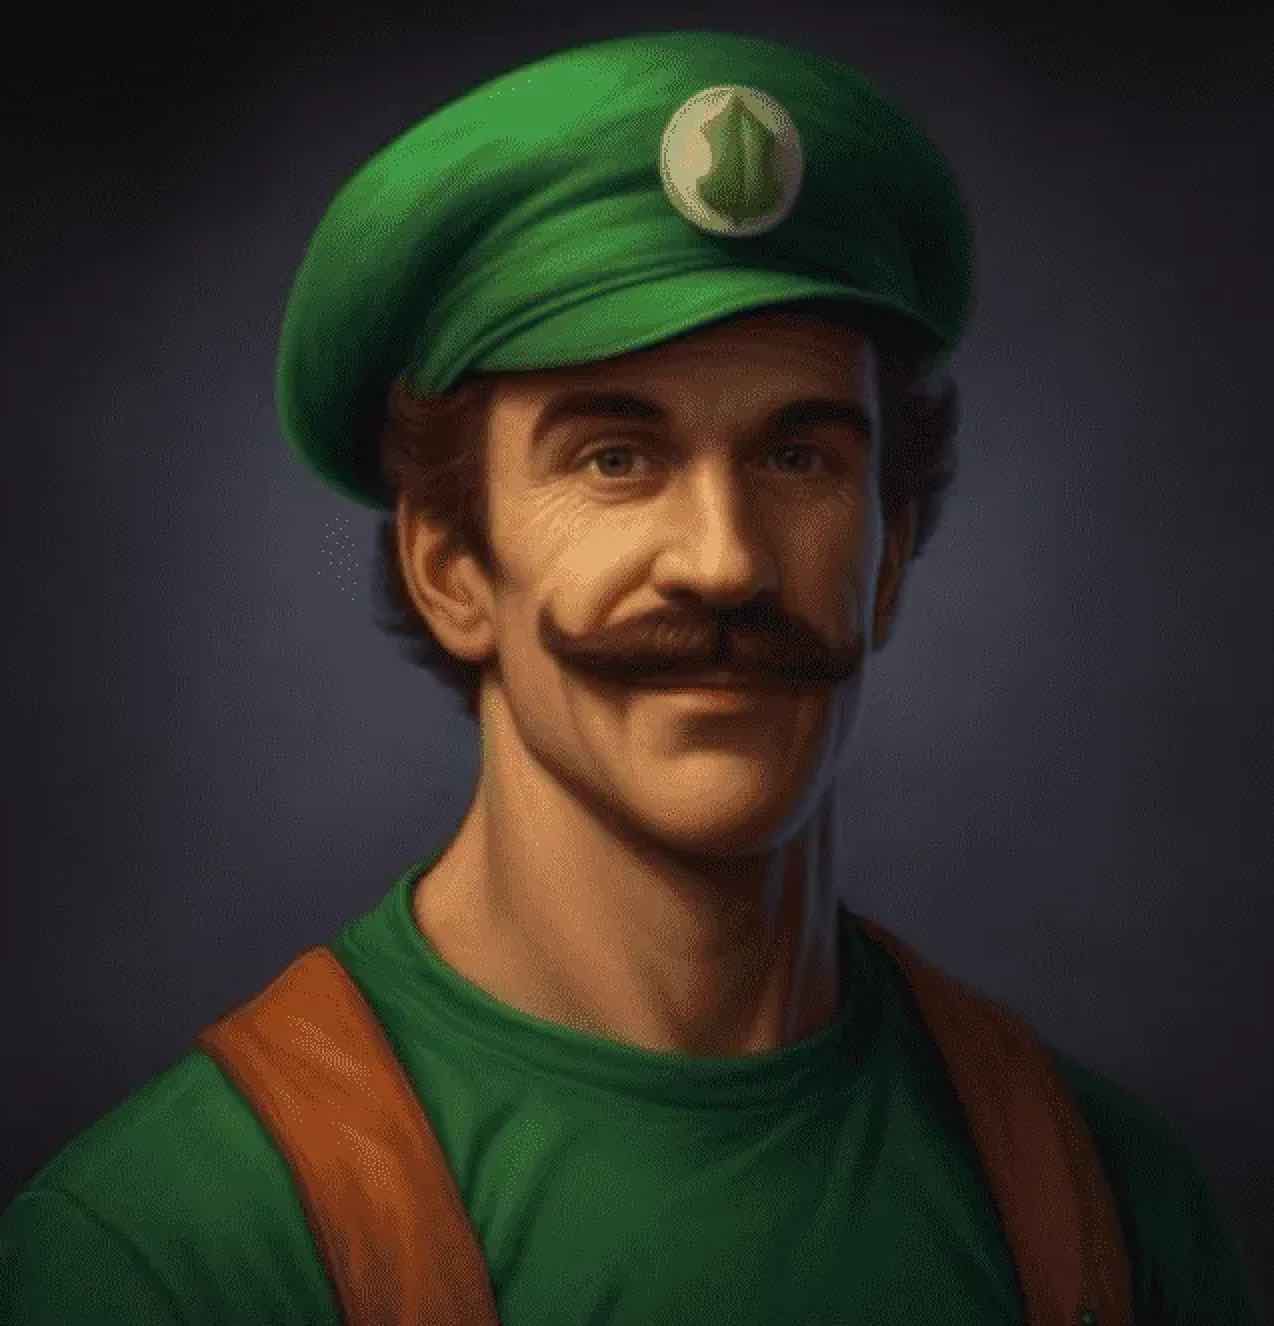 This is what Luigi from Mario Bros. would look like in real life ...